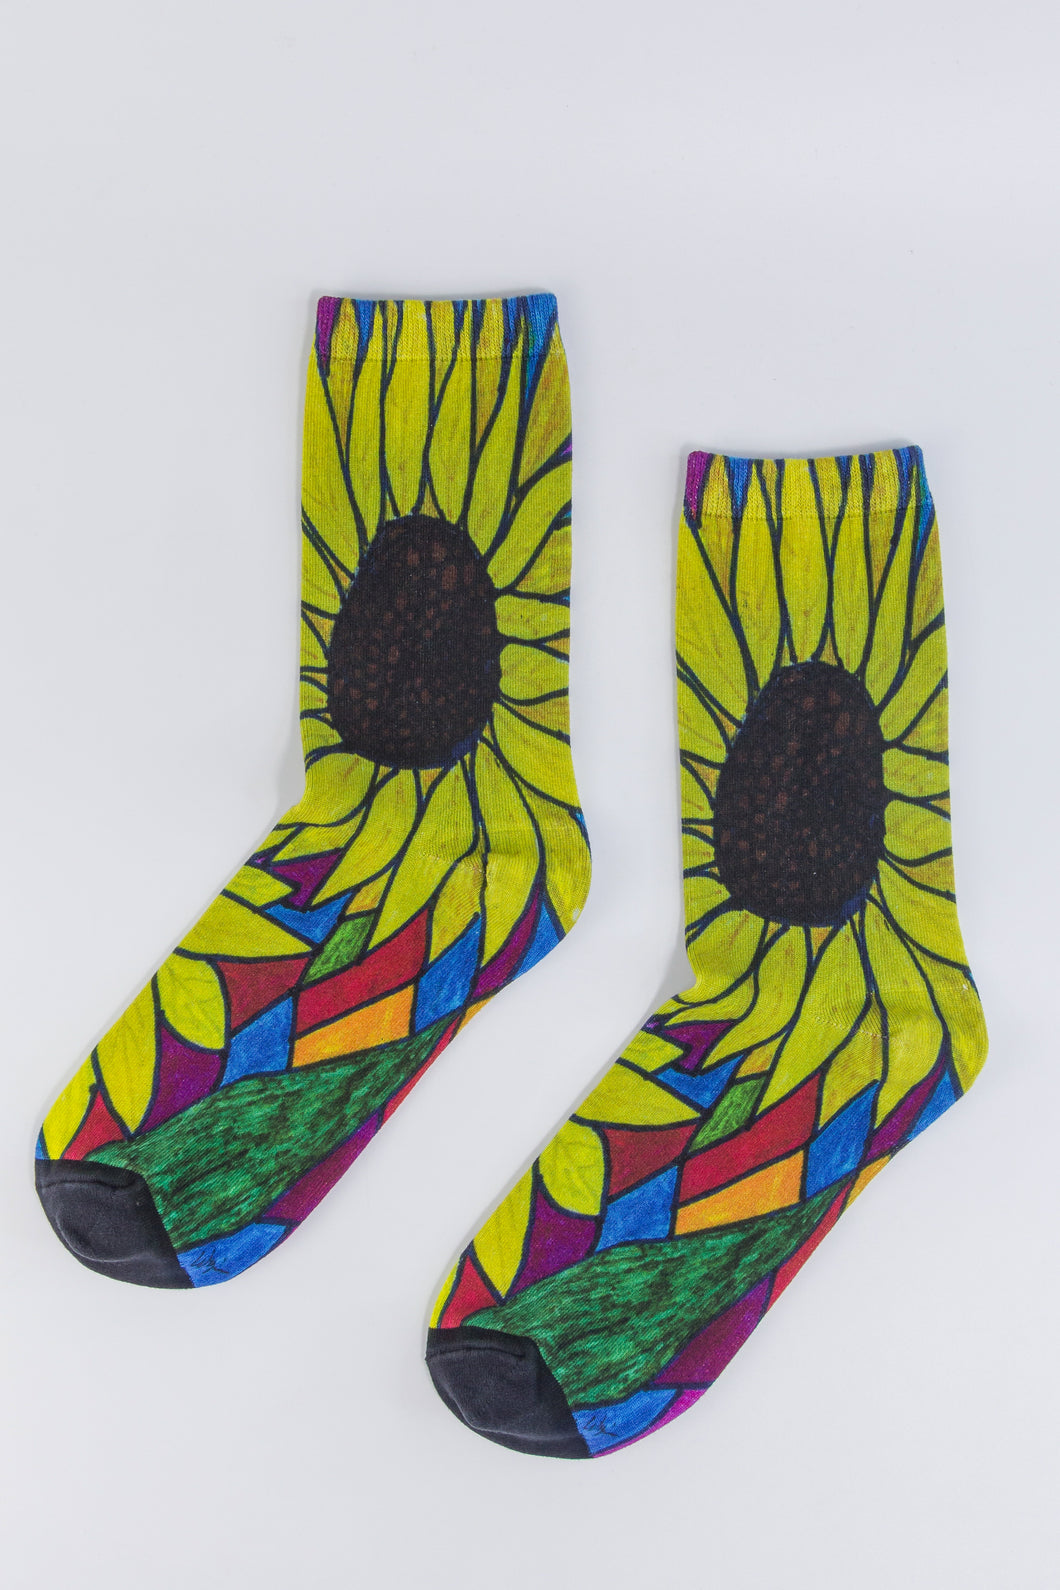 Bamboo sock with a large yellow sunflower design from the heel to the top of the sock outlined in green, blue, orange, and burgundy.